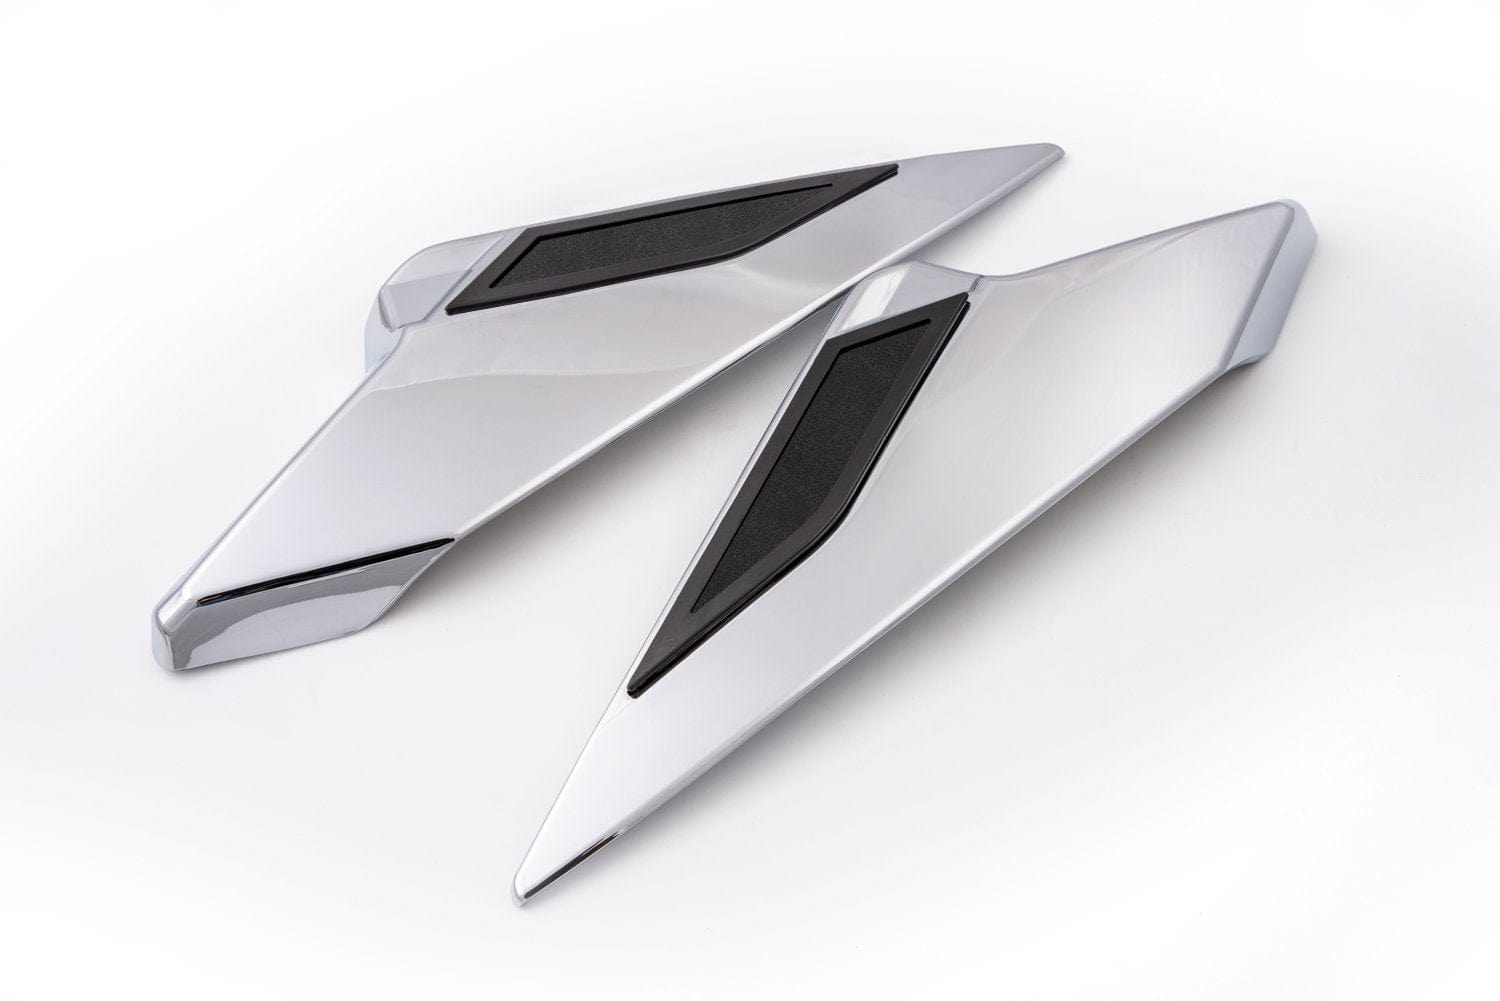 GoldStrike Trim TWINART Side Covers for Gold Wing